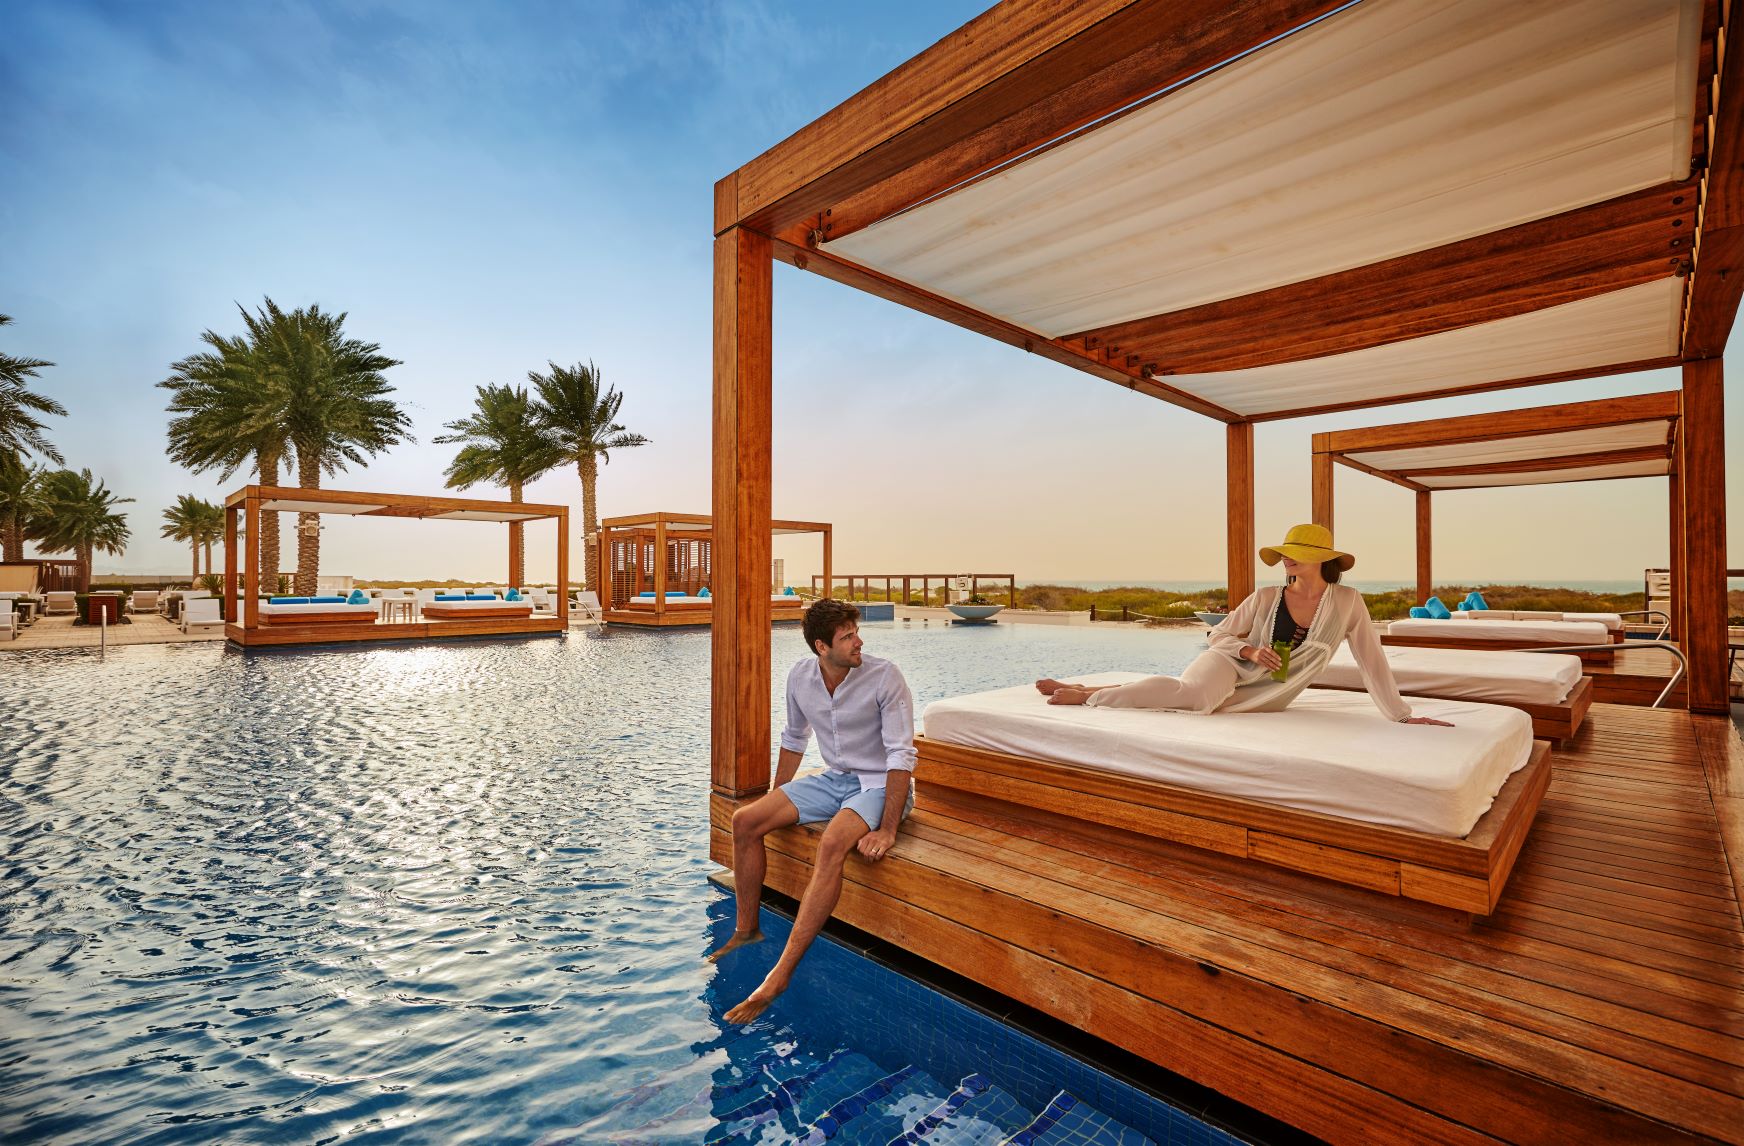 ETIHAD AIRWAYS LAUNCHES THREE NEW OFFERS FOR GUESTS TO ENJOY THEIR STOPOVER IN ABU DHABI